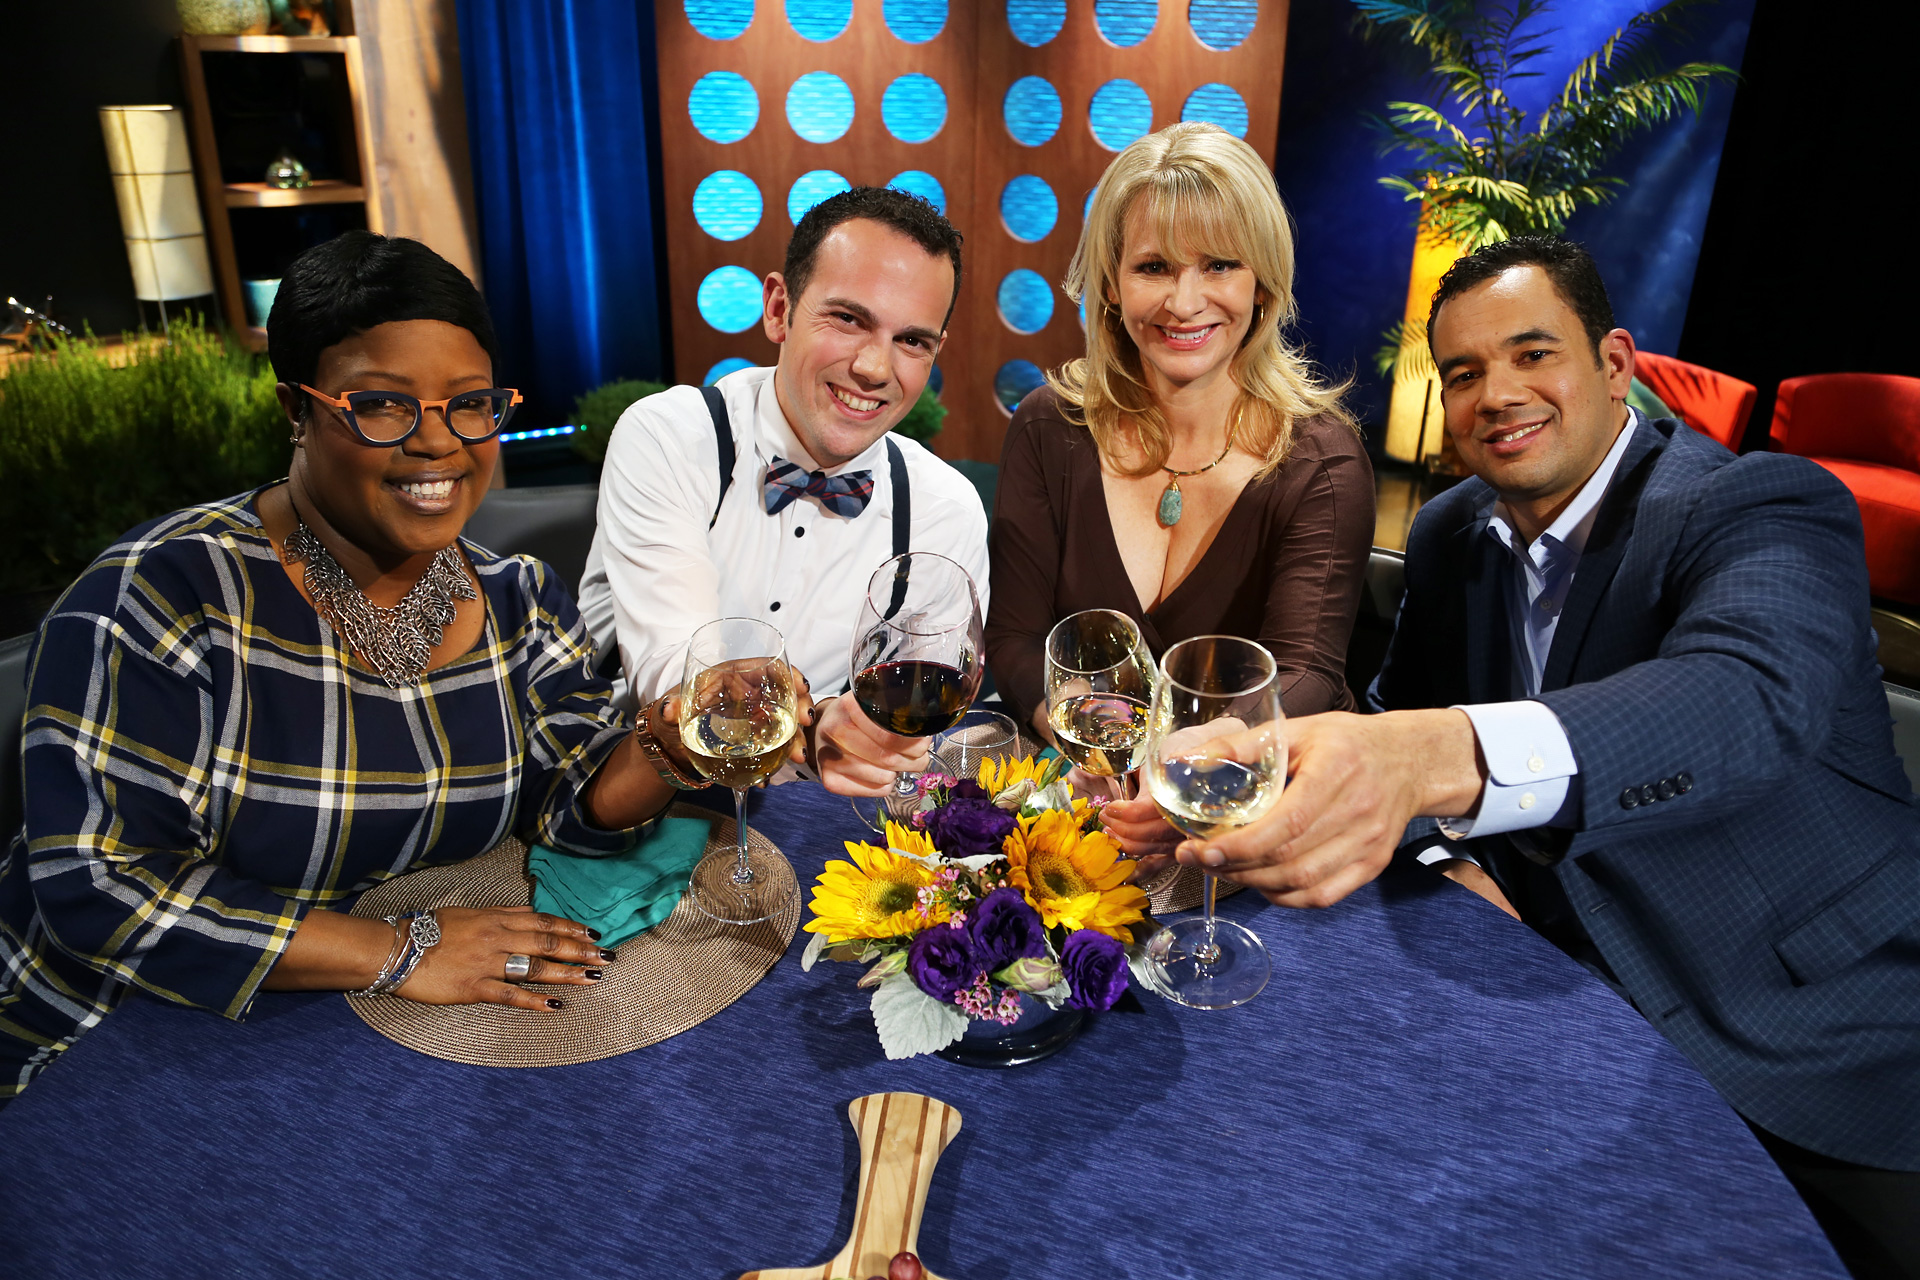 Host Leslie Sbrocco and guests on the set of the episode 2 of season 11.